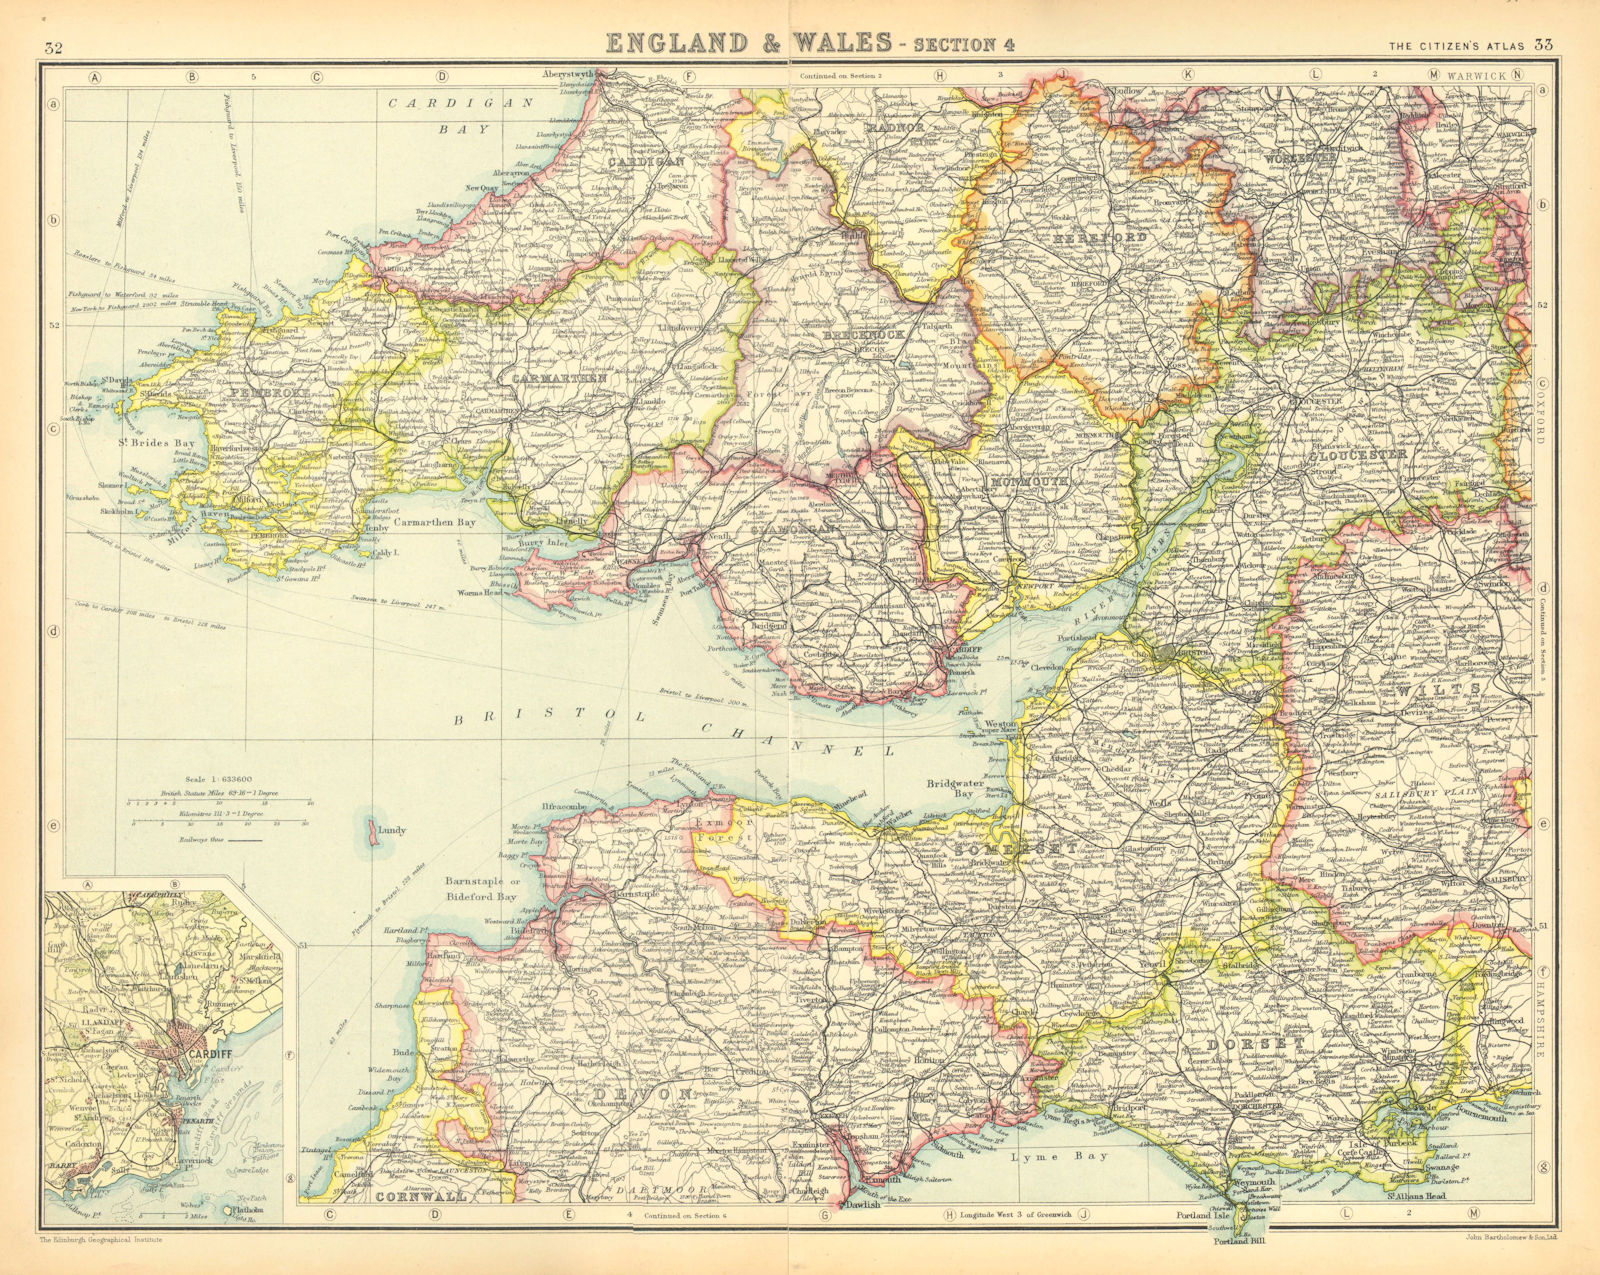 SOUTH WALES & SOUTH WEST ENGLAND.Bristol Channel Severn Estuary.Cardiff 1924 map